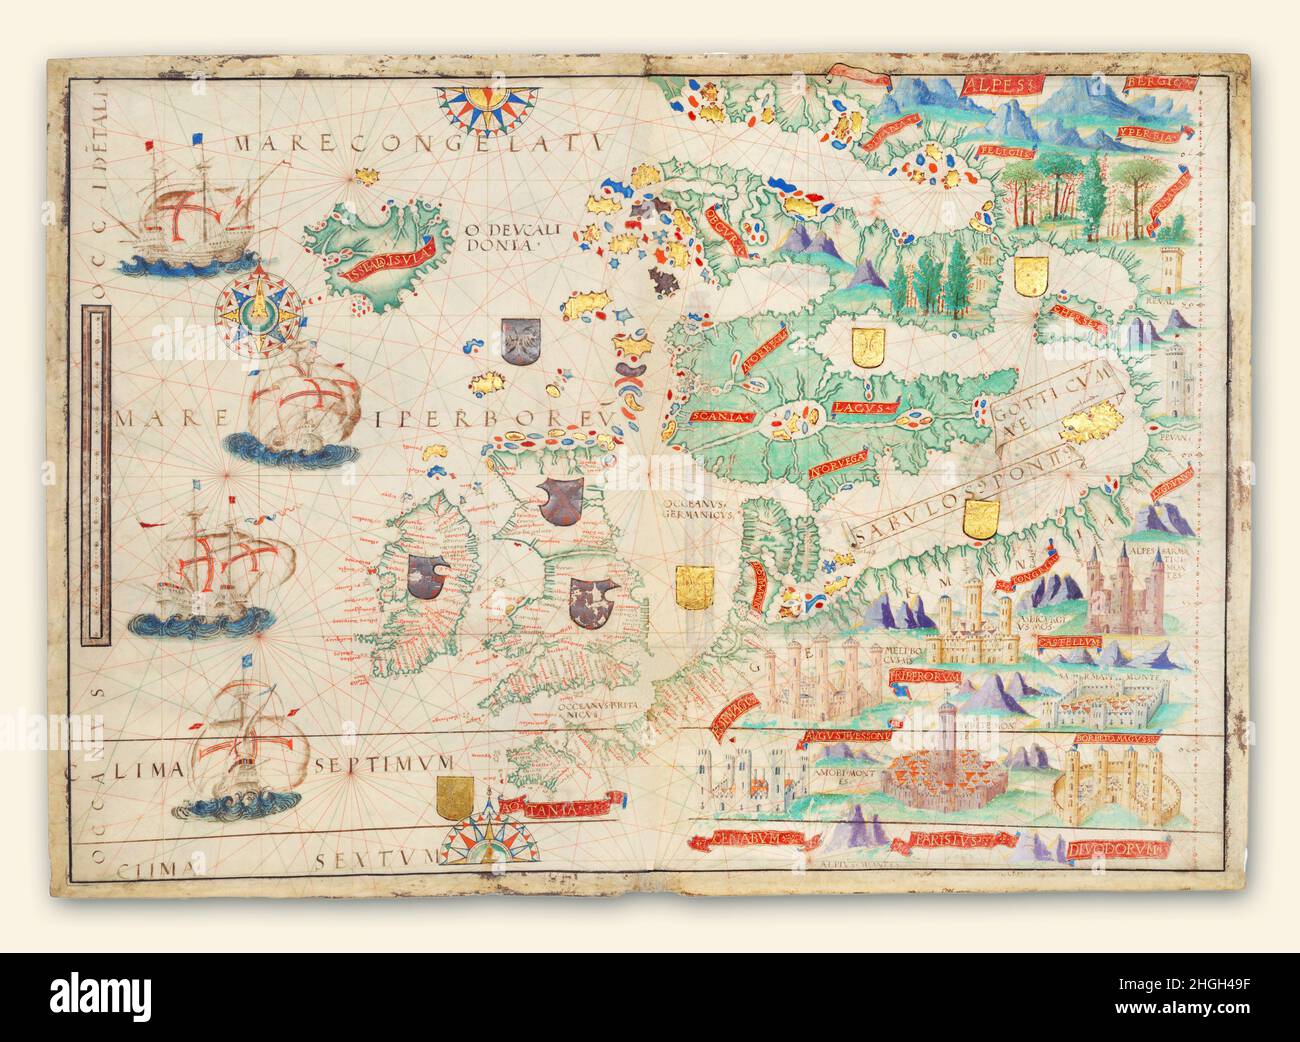 A Nautical Atlas of the Northeastern Atlantic Ocean and Northern Europe from the Miller Atlas in the collections of the National Library of France. Produced for King Manuel I of Portugal in 1519 by cartographers Pedro Reinel, his son Jorge Reinel, and Lopo Homem and miniaturist António de Holanda, the atlas contains eight maps on six loose sheets, painted on both sides.. This image has been retouched to remove the ugly fold and some of the detrius left over the centuries. Stock Photo